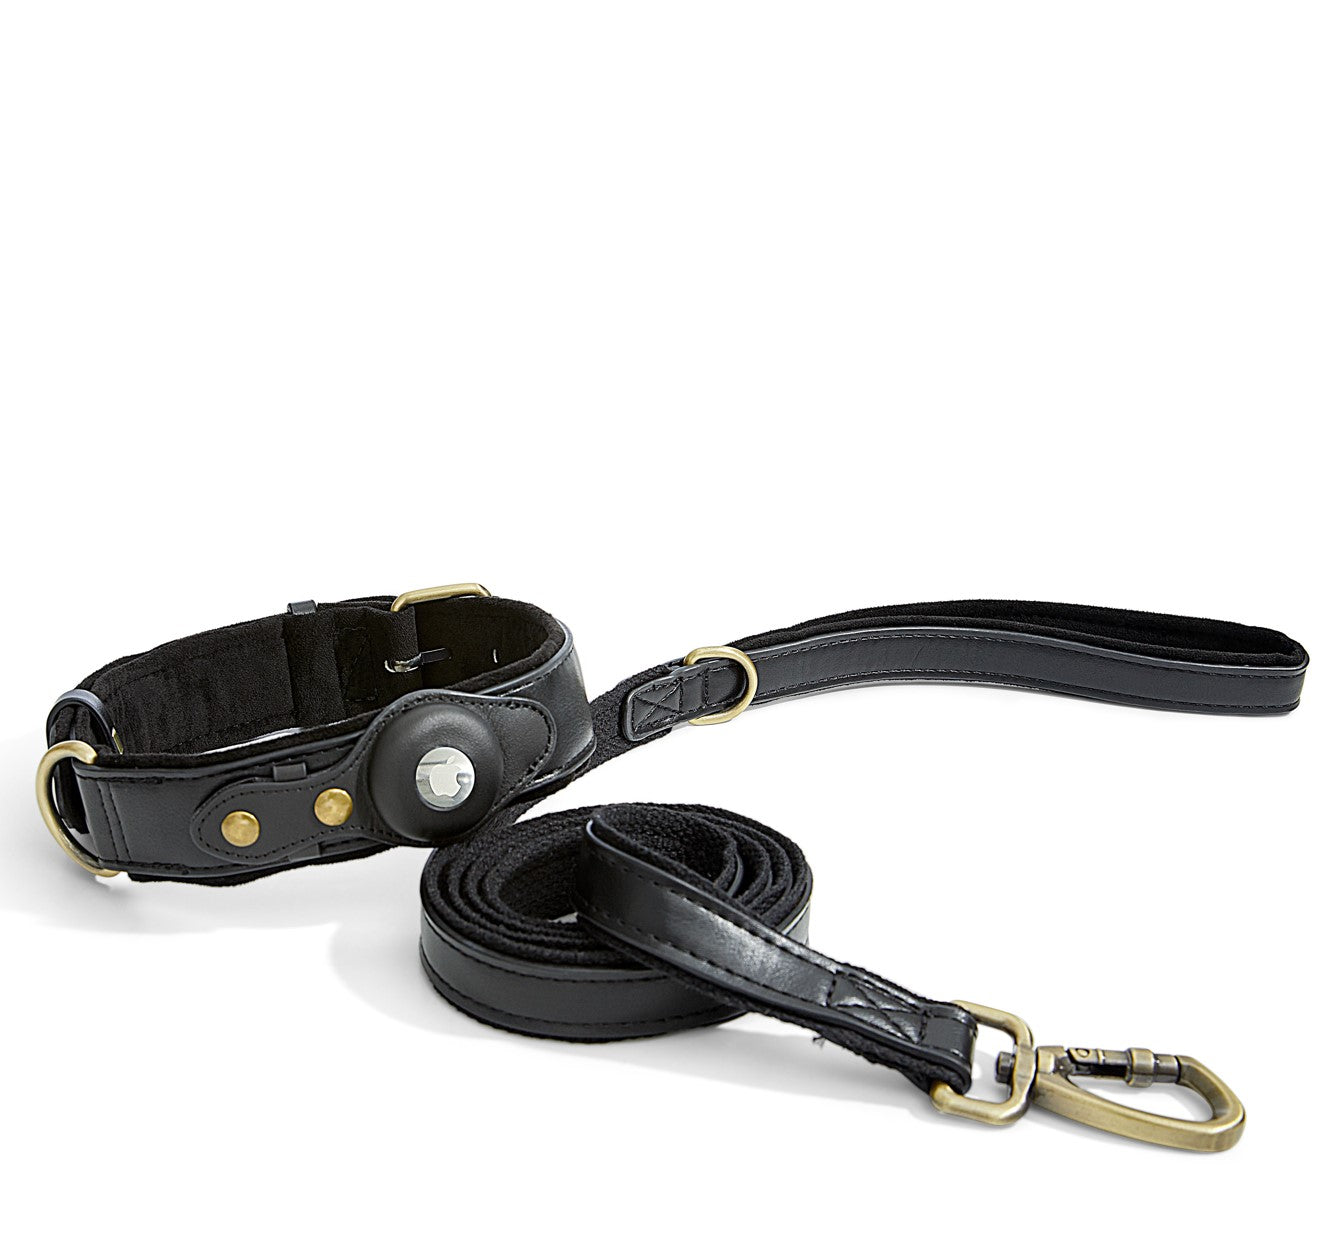 Orchard black airtag collar and leash set with custom air tag holder. Strong antique brass buckles and clasps.  Reinforced backing on the leash.